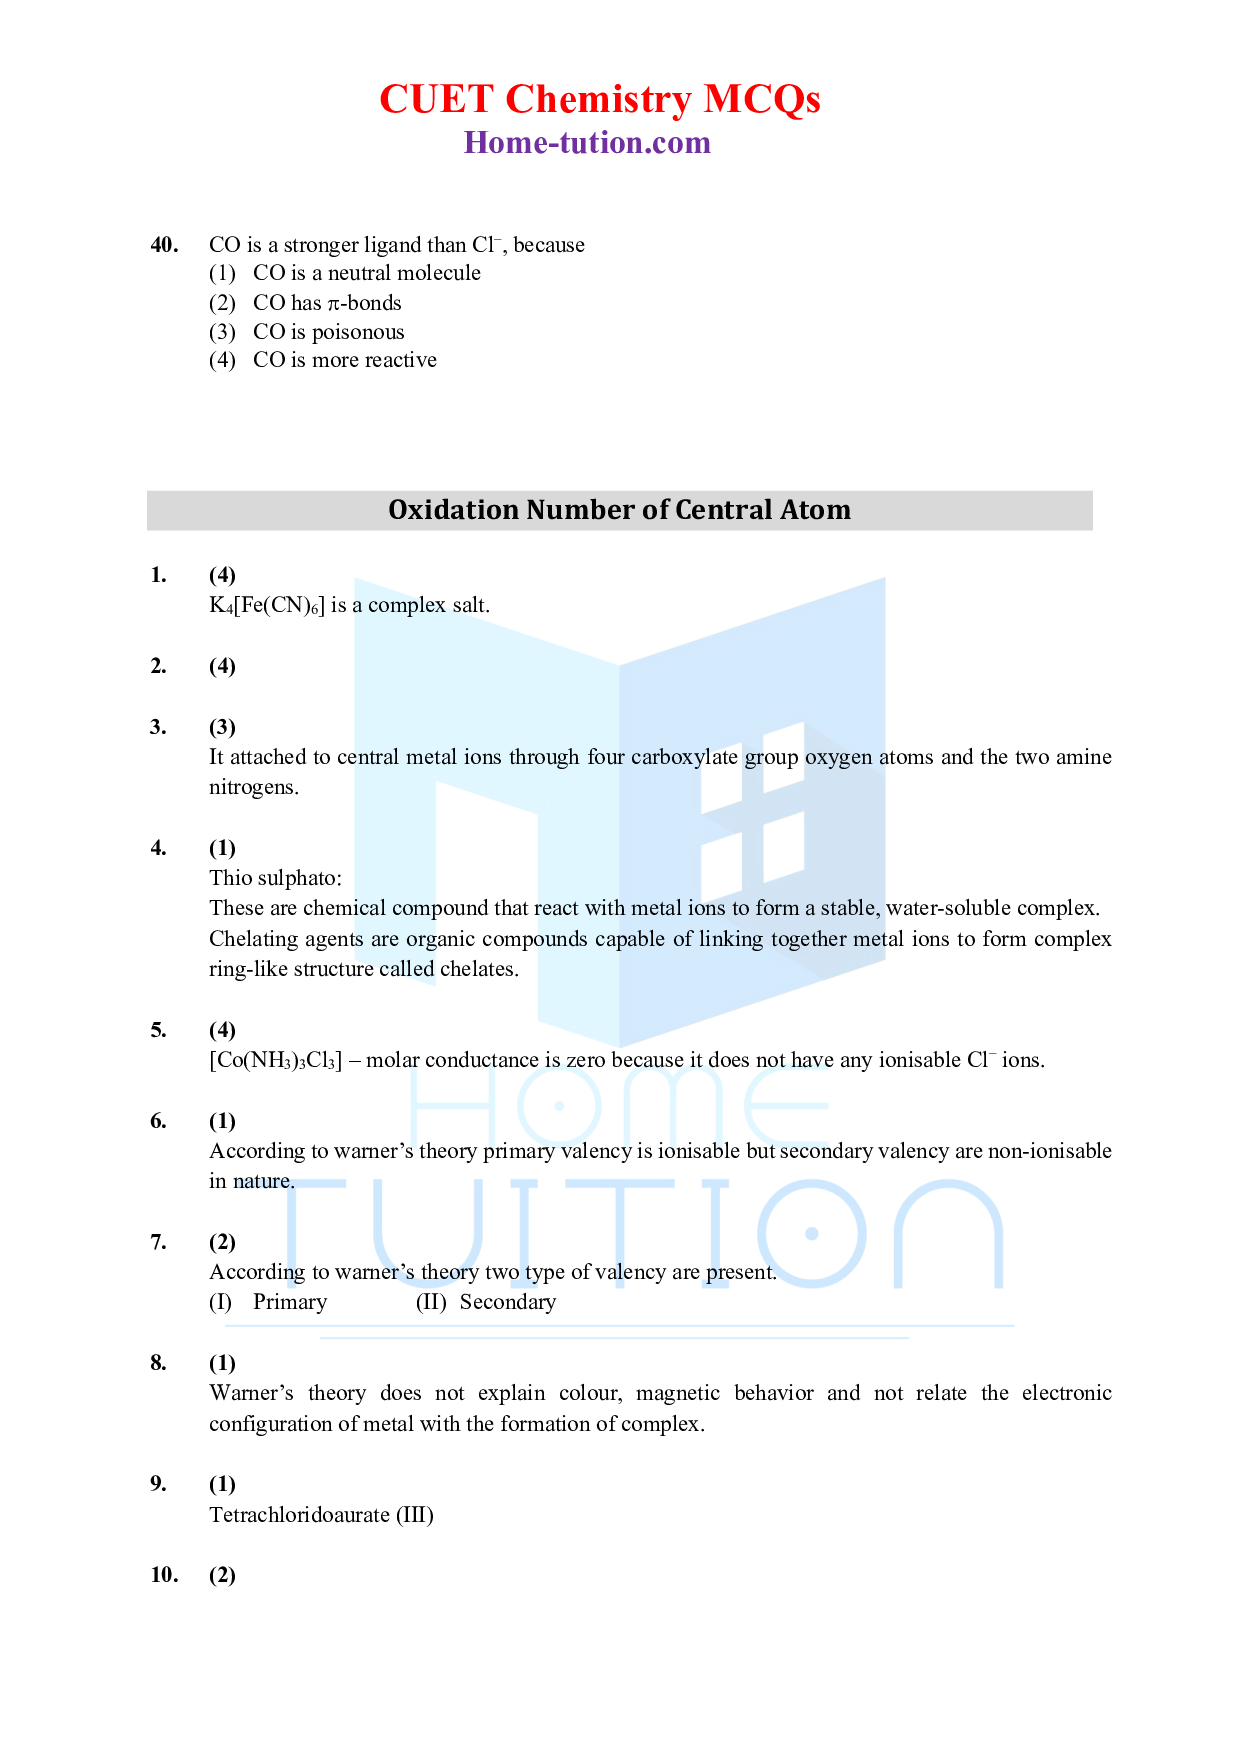 CUET MCQ Questions For Chapter-09 Coordination Compounds